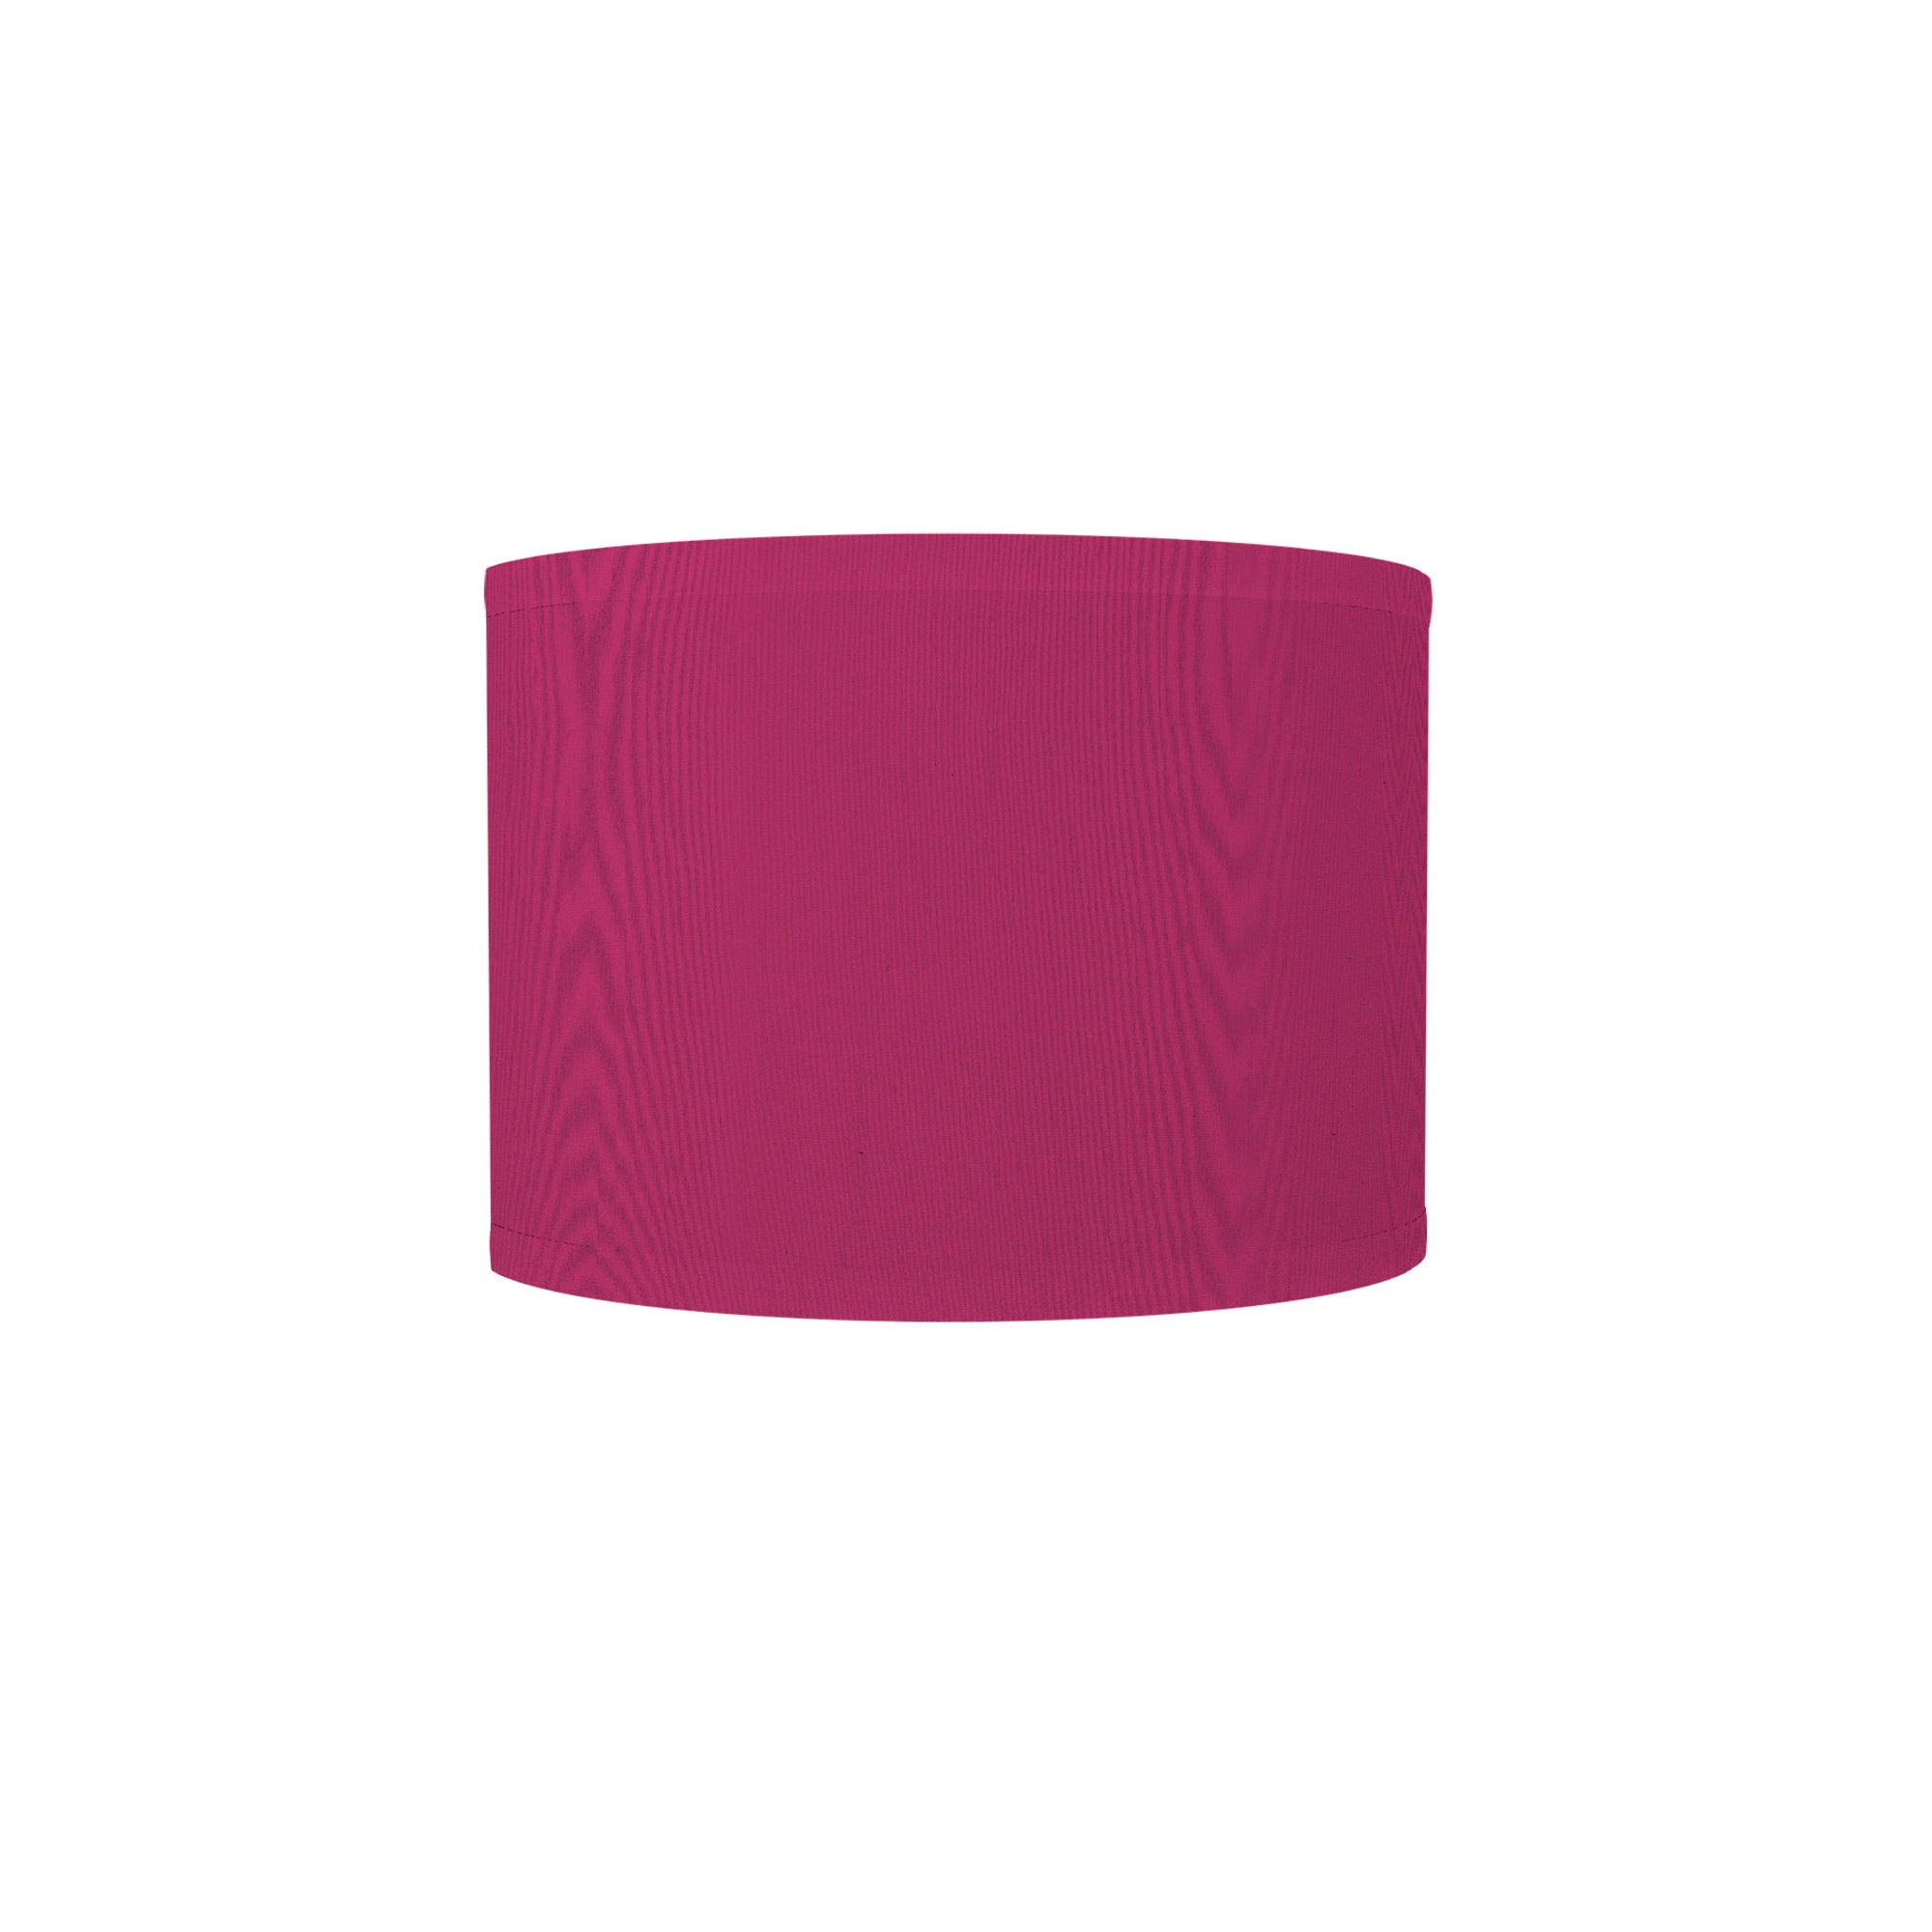 The Bryce Wall Sconce from Seascape Fixtures with a silk shade in berry color.